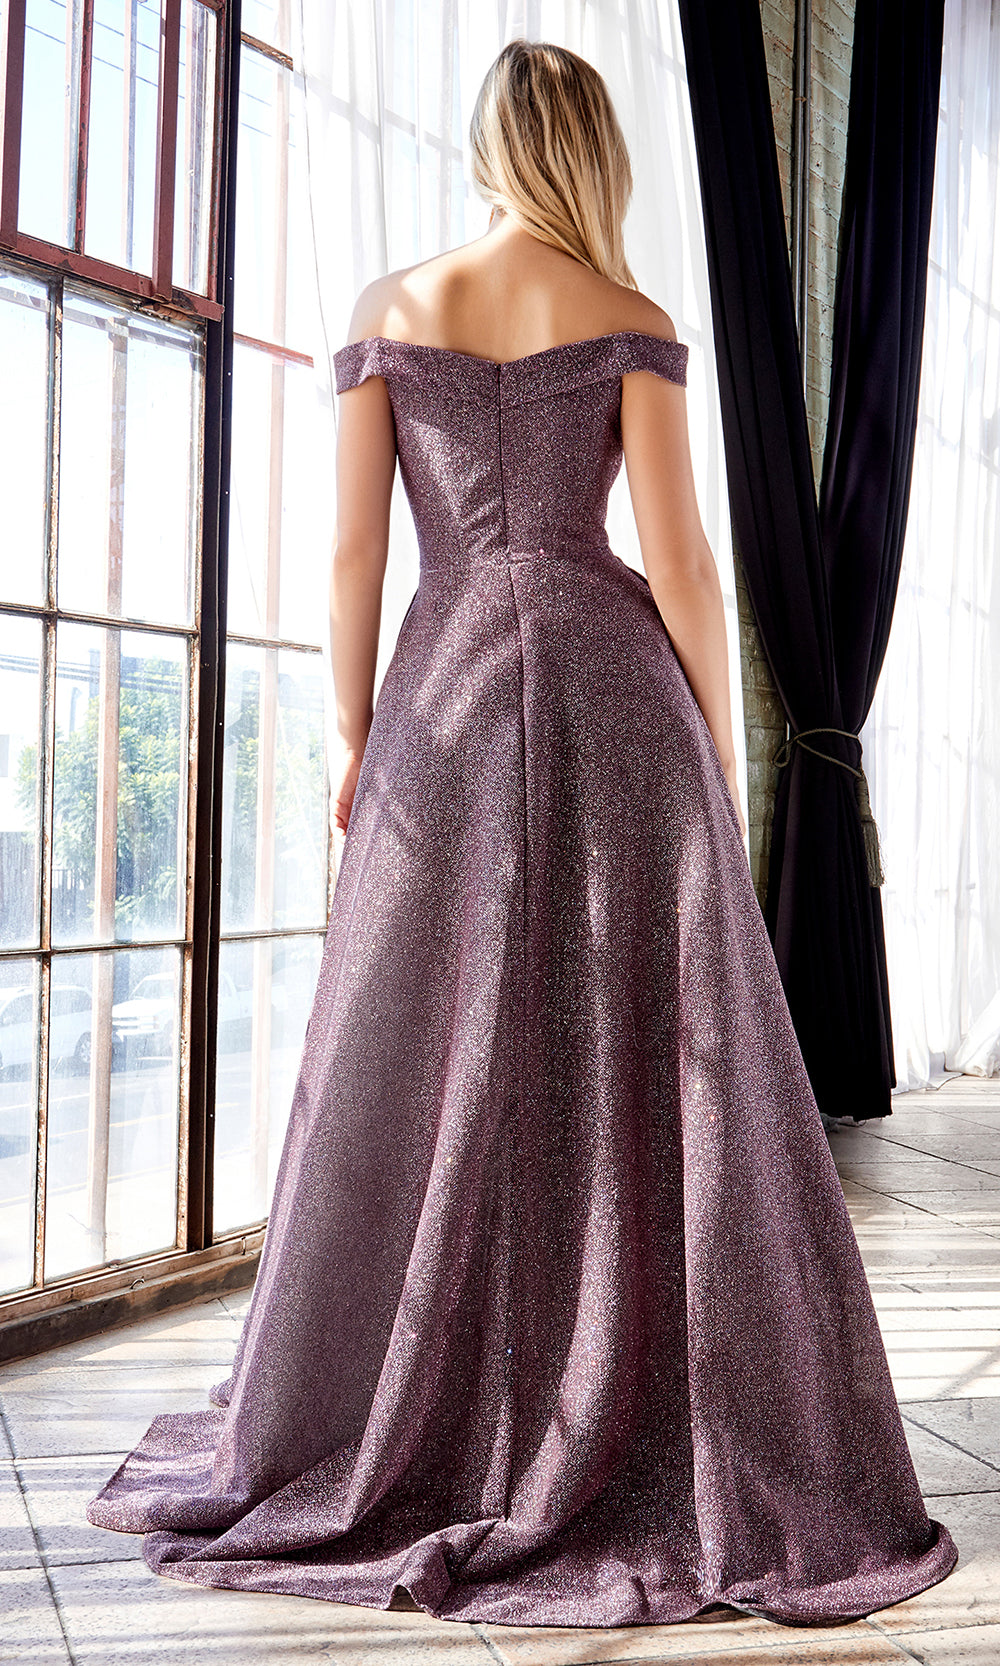 Cinderella Divine CB056 long deep mauve metallic beaded off shoulder semi ballgown. Perfect purple evening dress for prom, formal wedding guest dress, indowestern gown, prom, engagement/wedding reception, debut, sweet 16. Plus sizes available-b.jpg